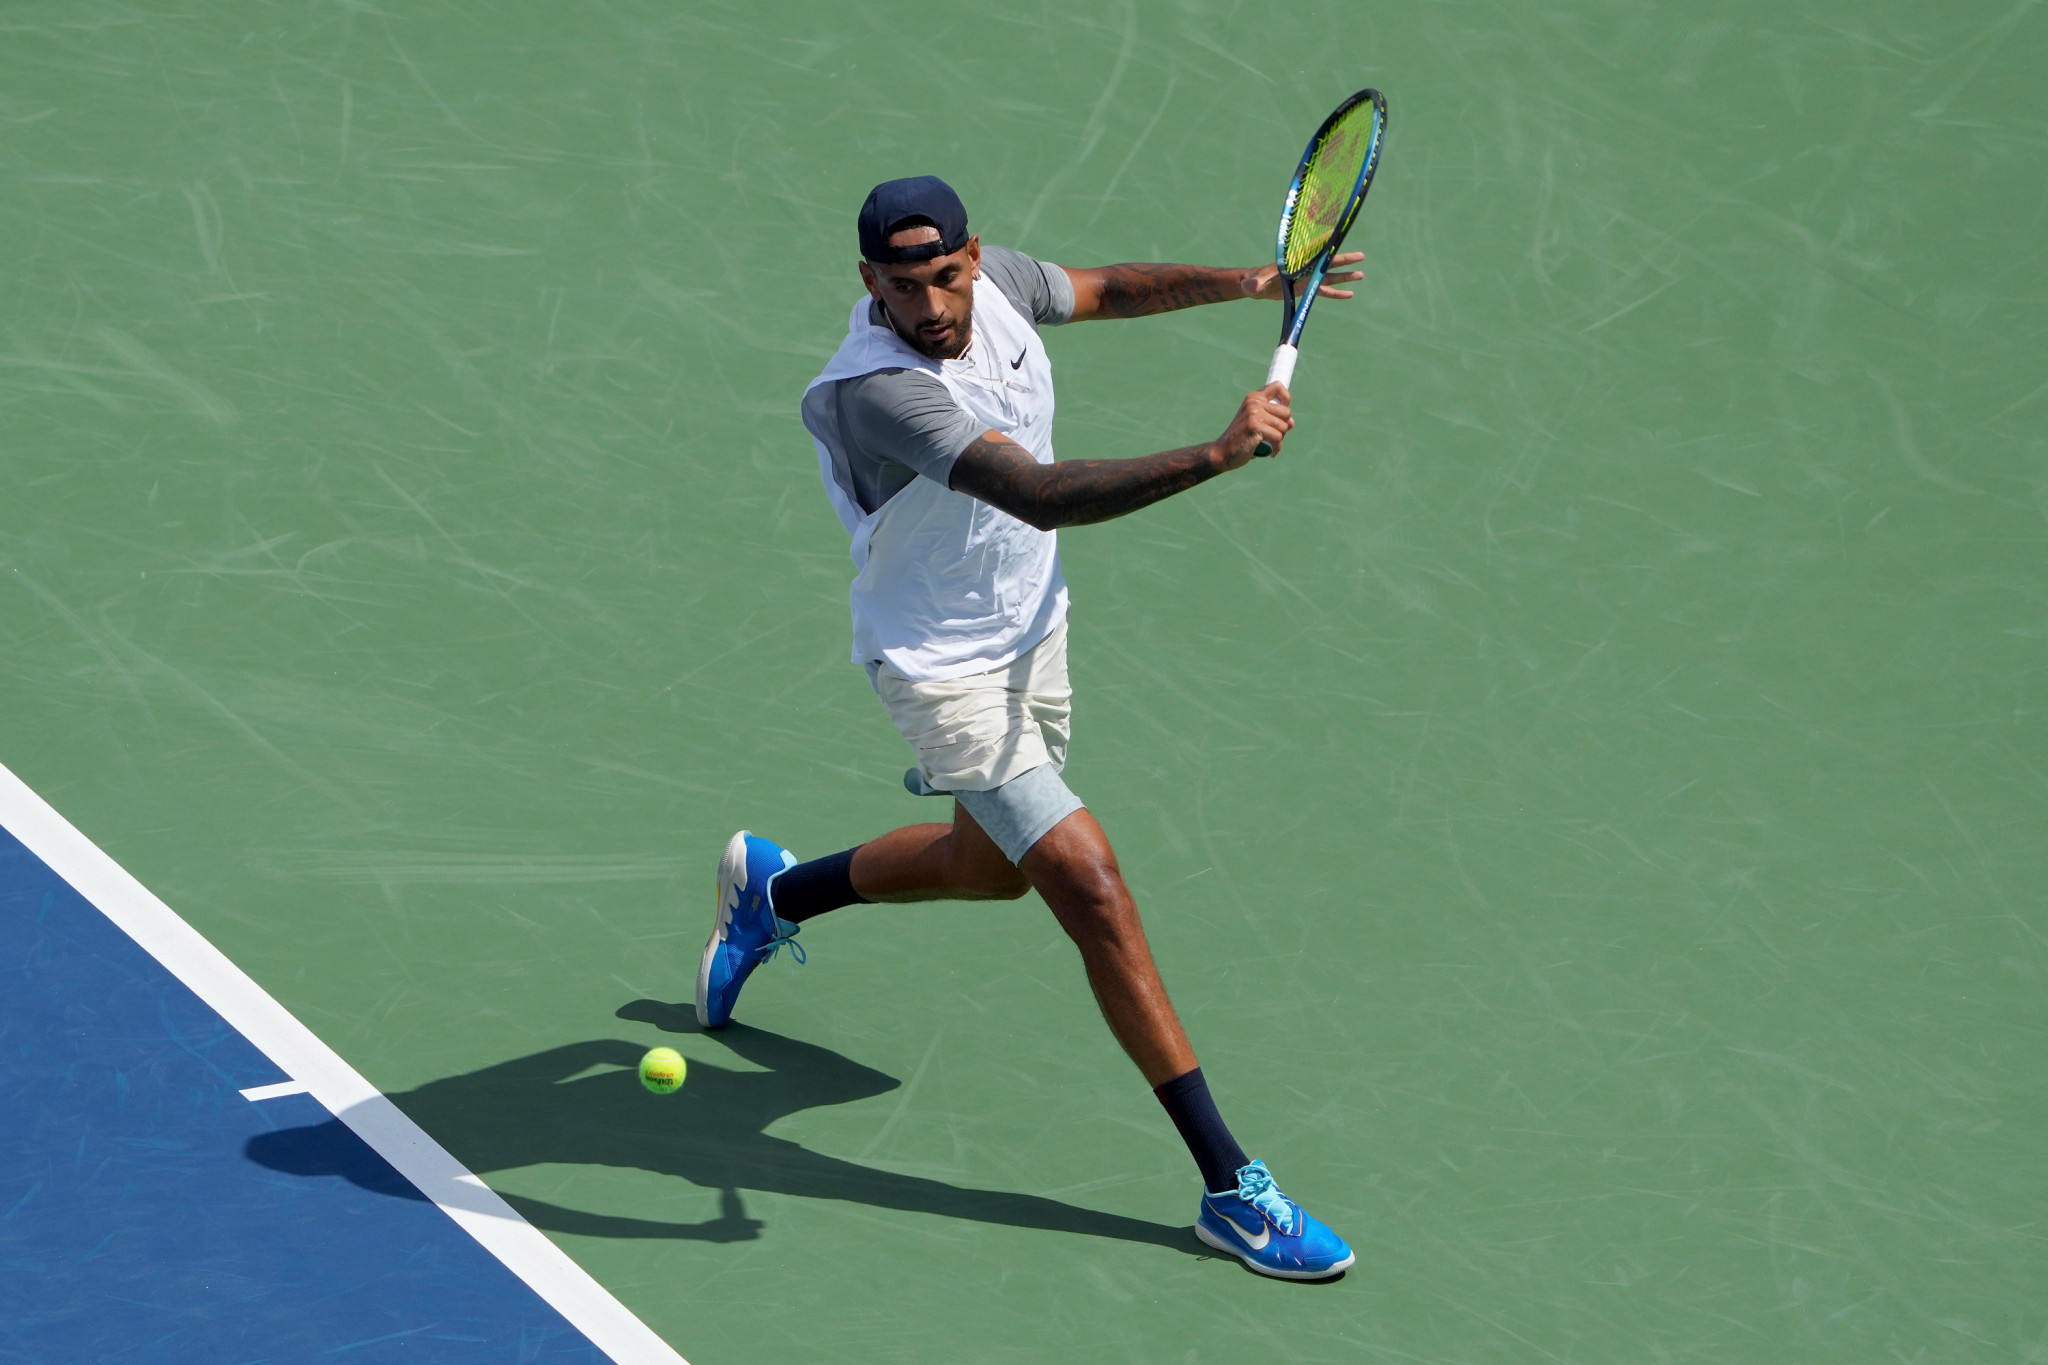 Nick Kyrgios is in the United States preparing for the final Grand Slam of the year, the US Open ©Getty Images